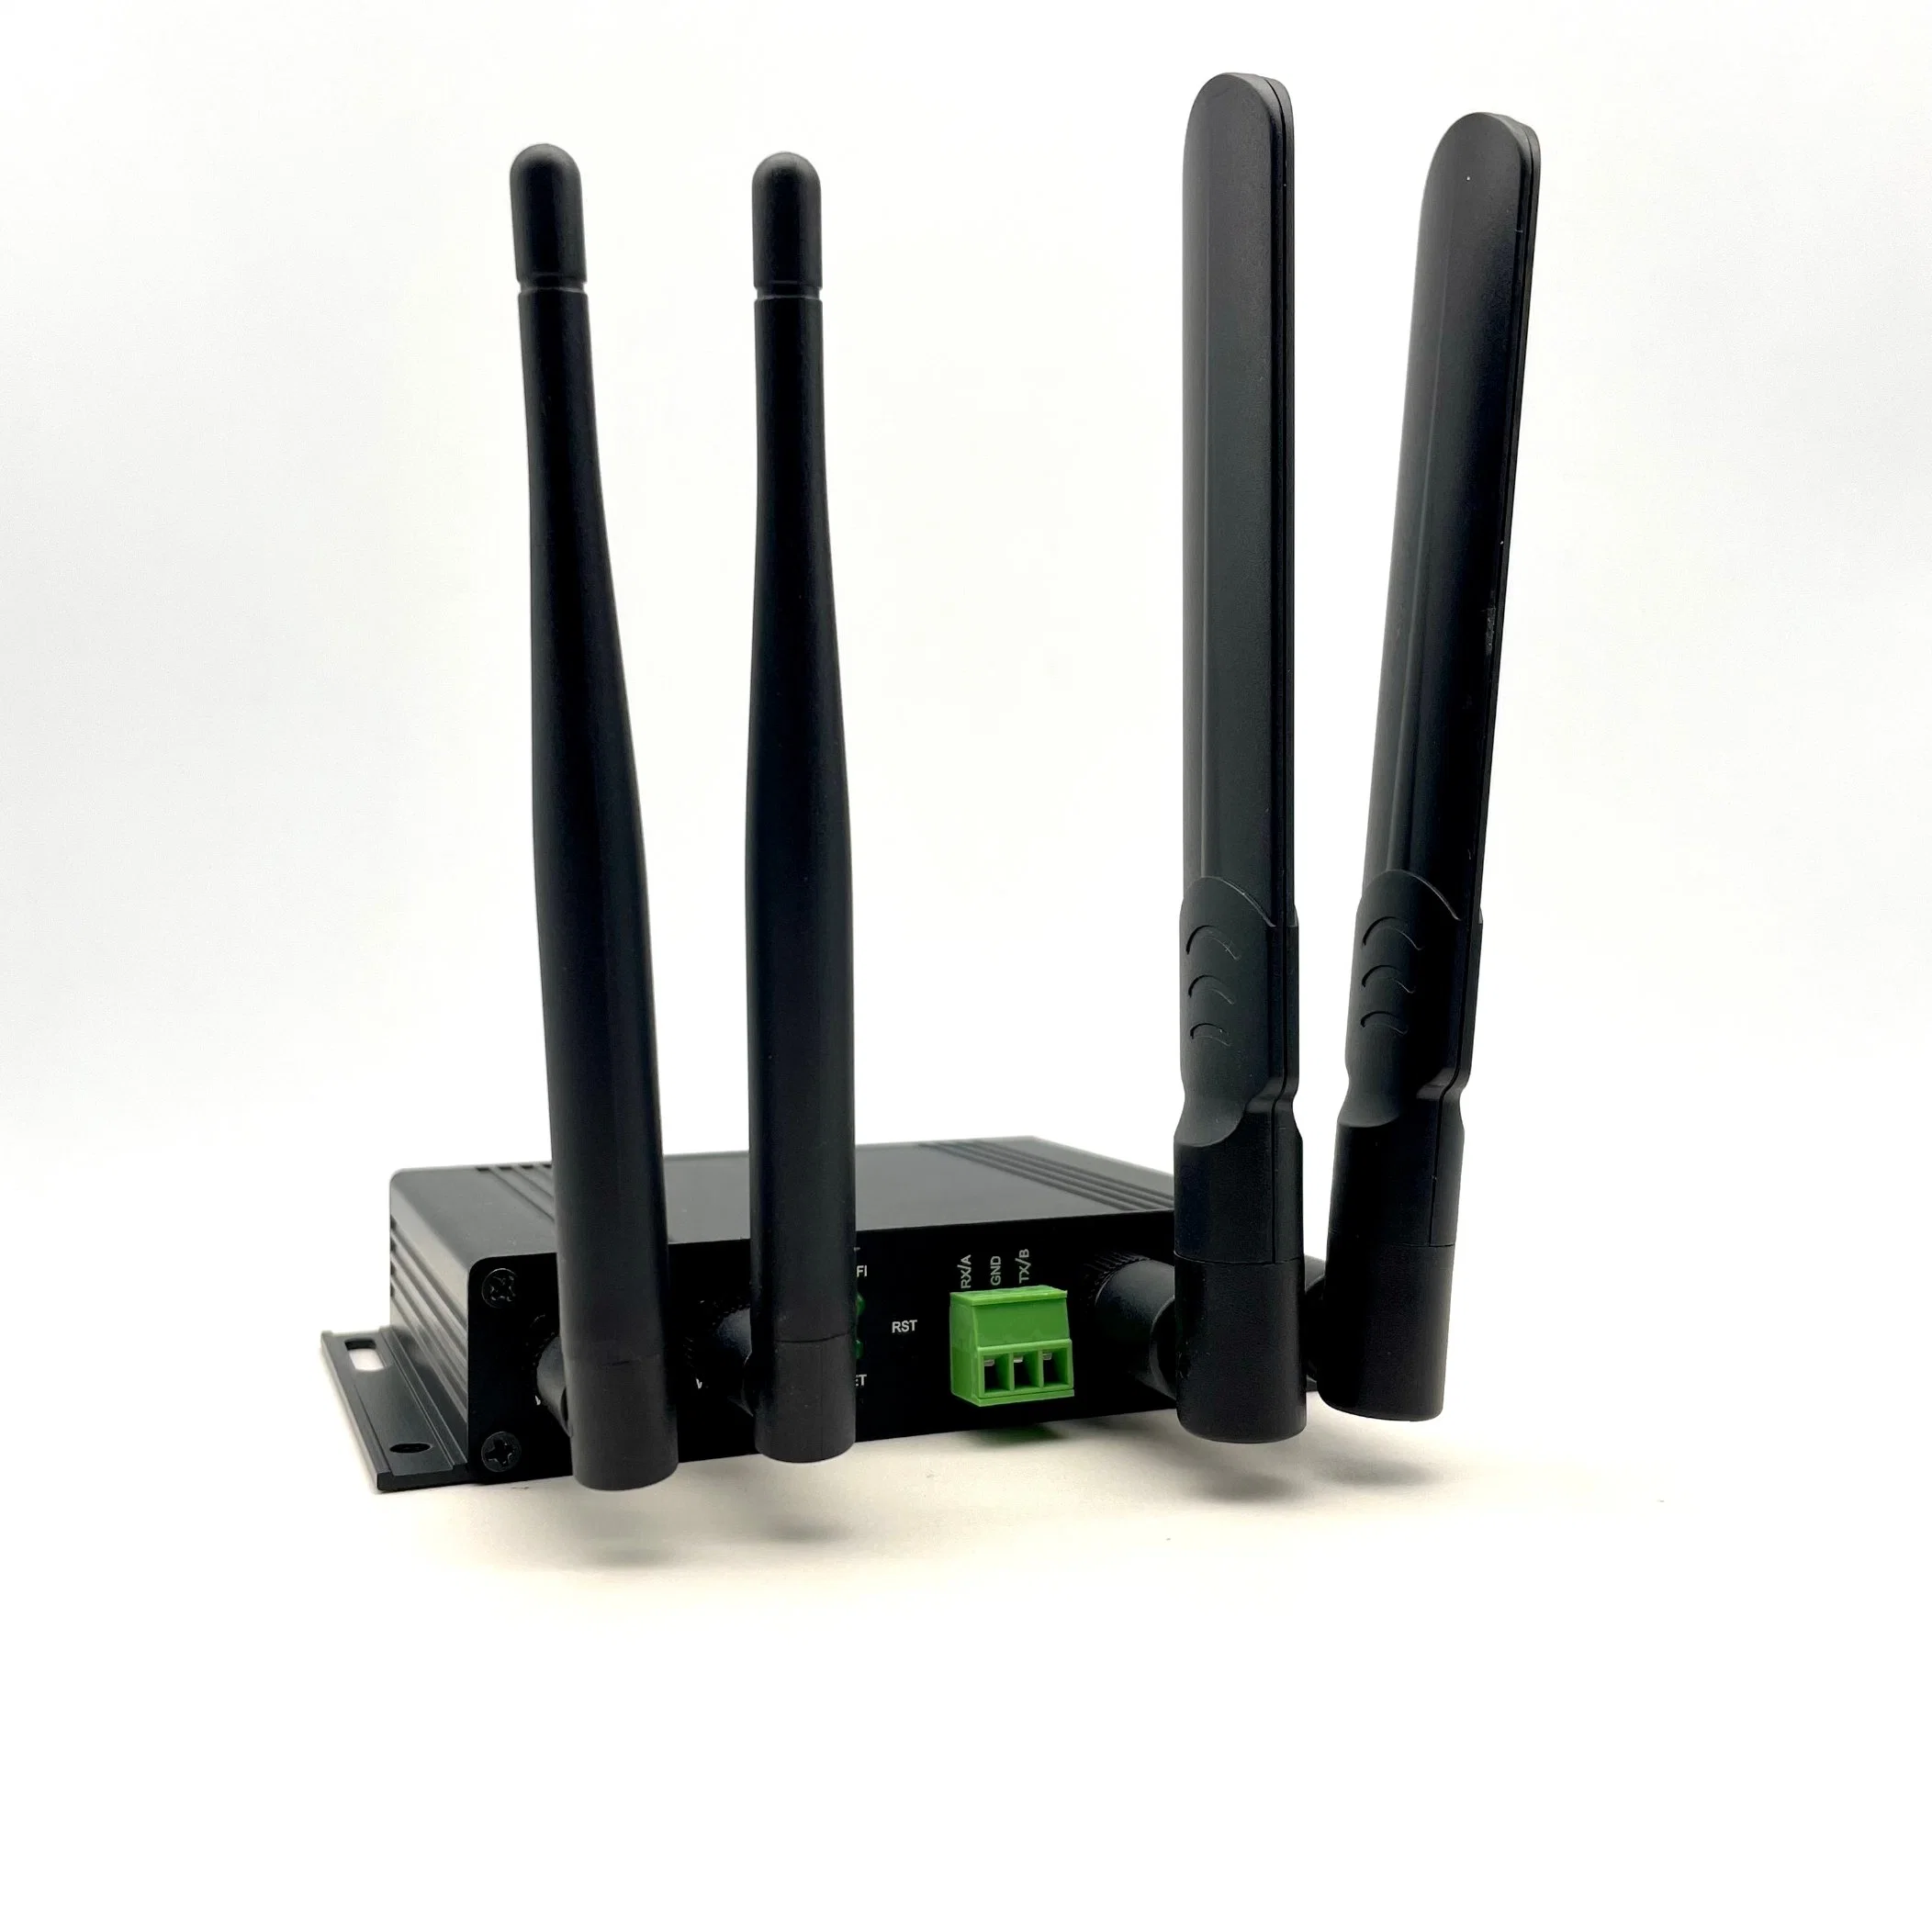 Open VPN Cellular Industrial 4G LTE Router Modem with 2.4GHz WiFi RS232/485 Port for ATM POS System